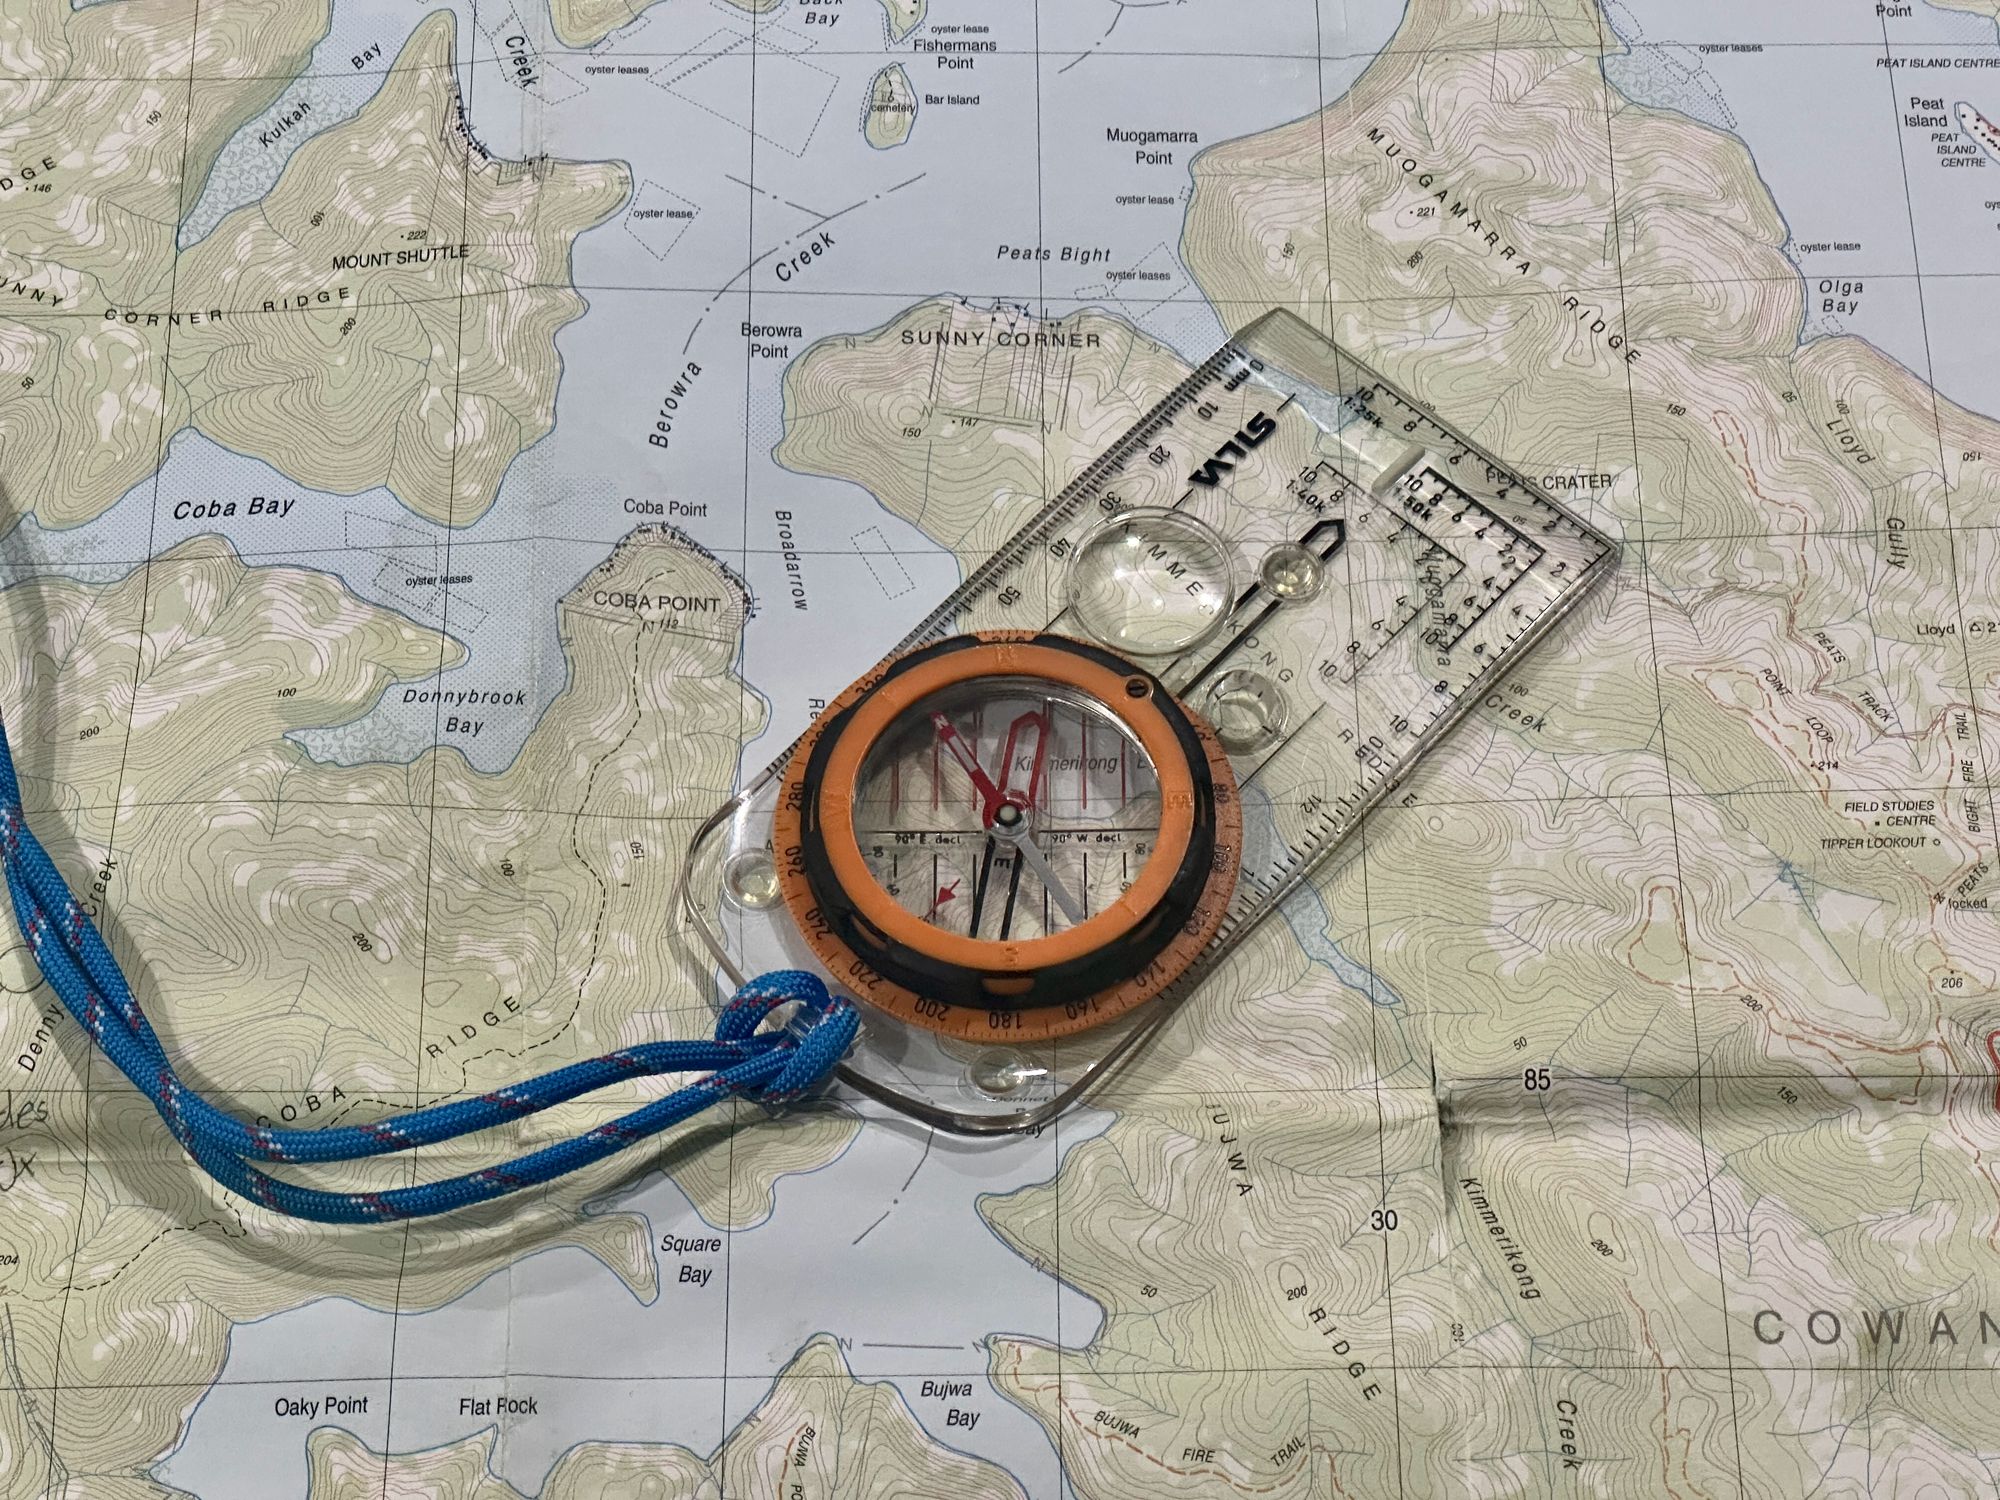 Using a compass to calculate distance